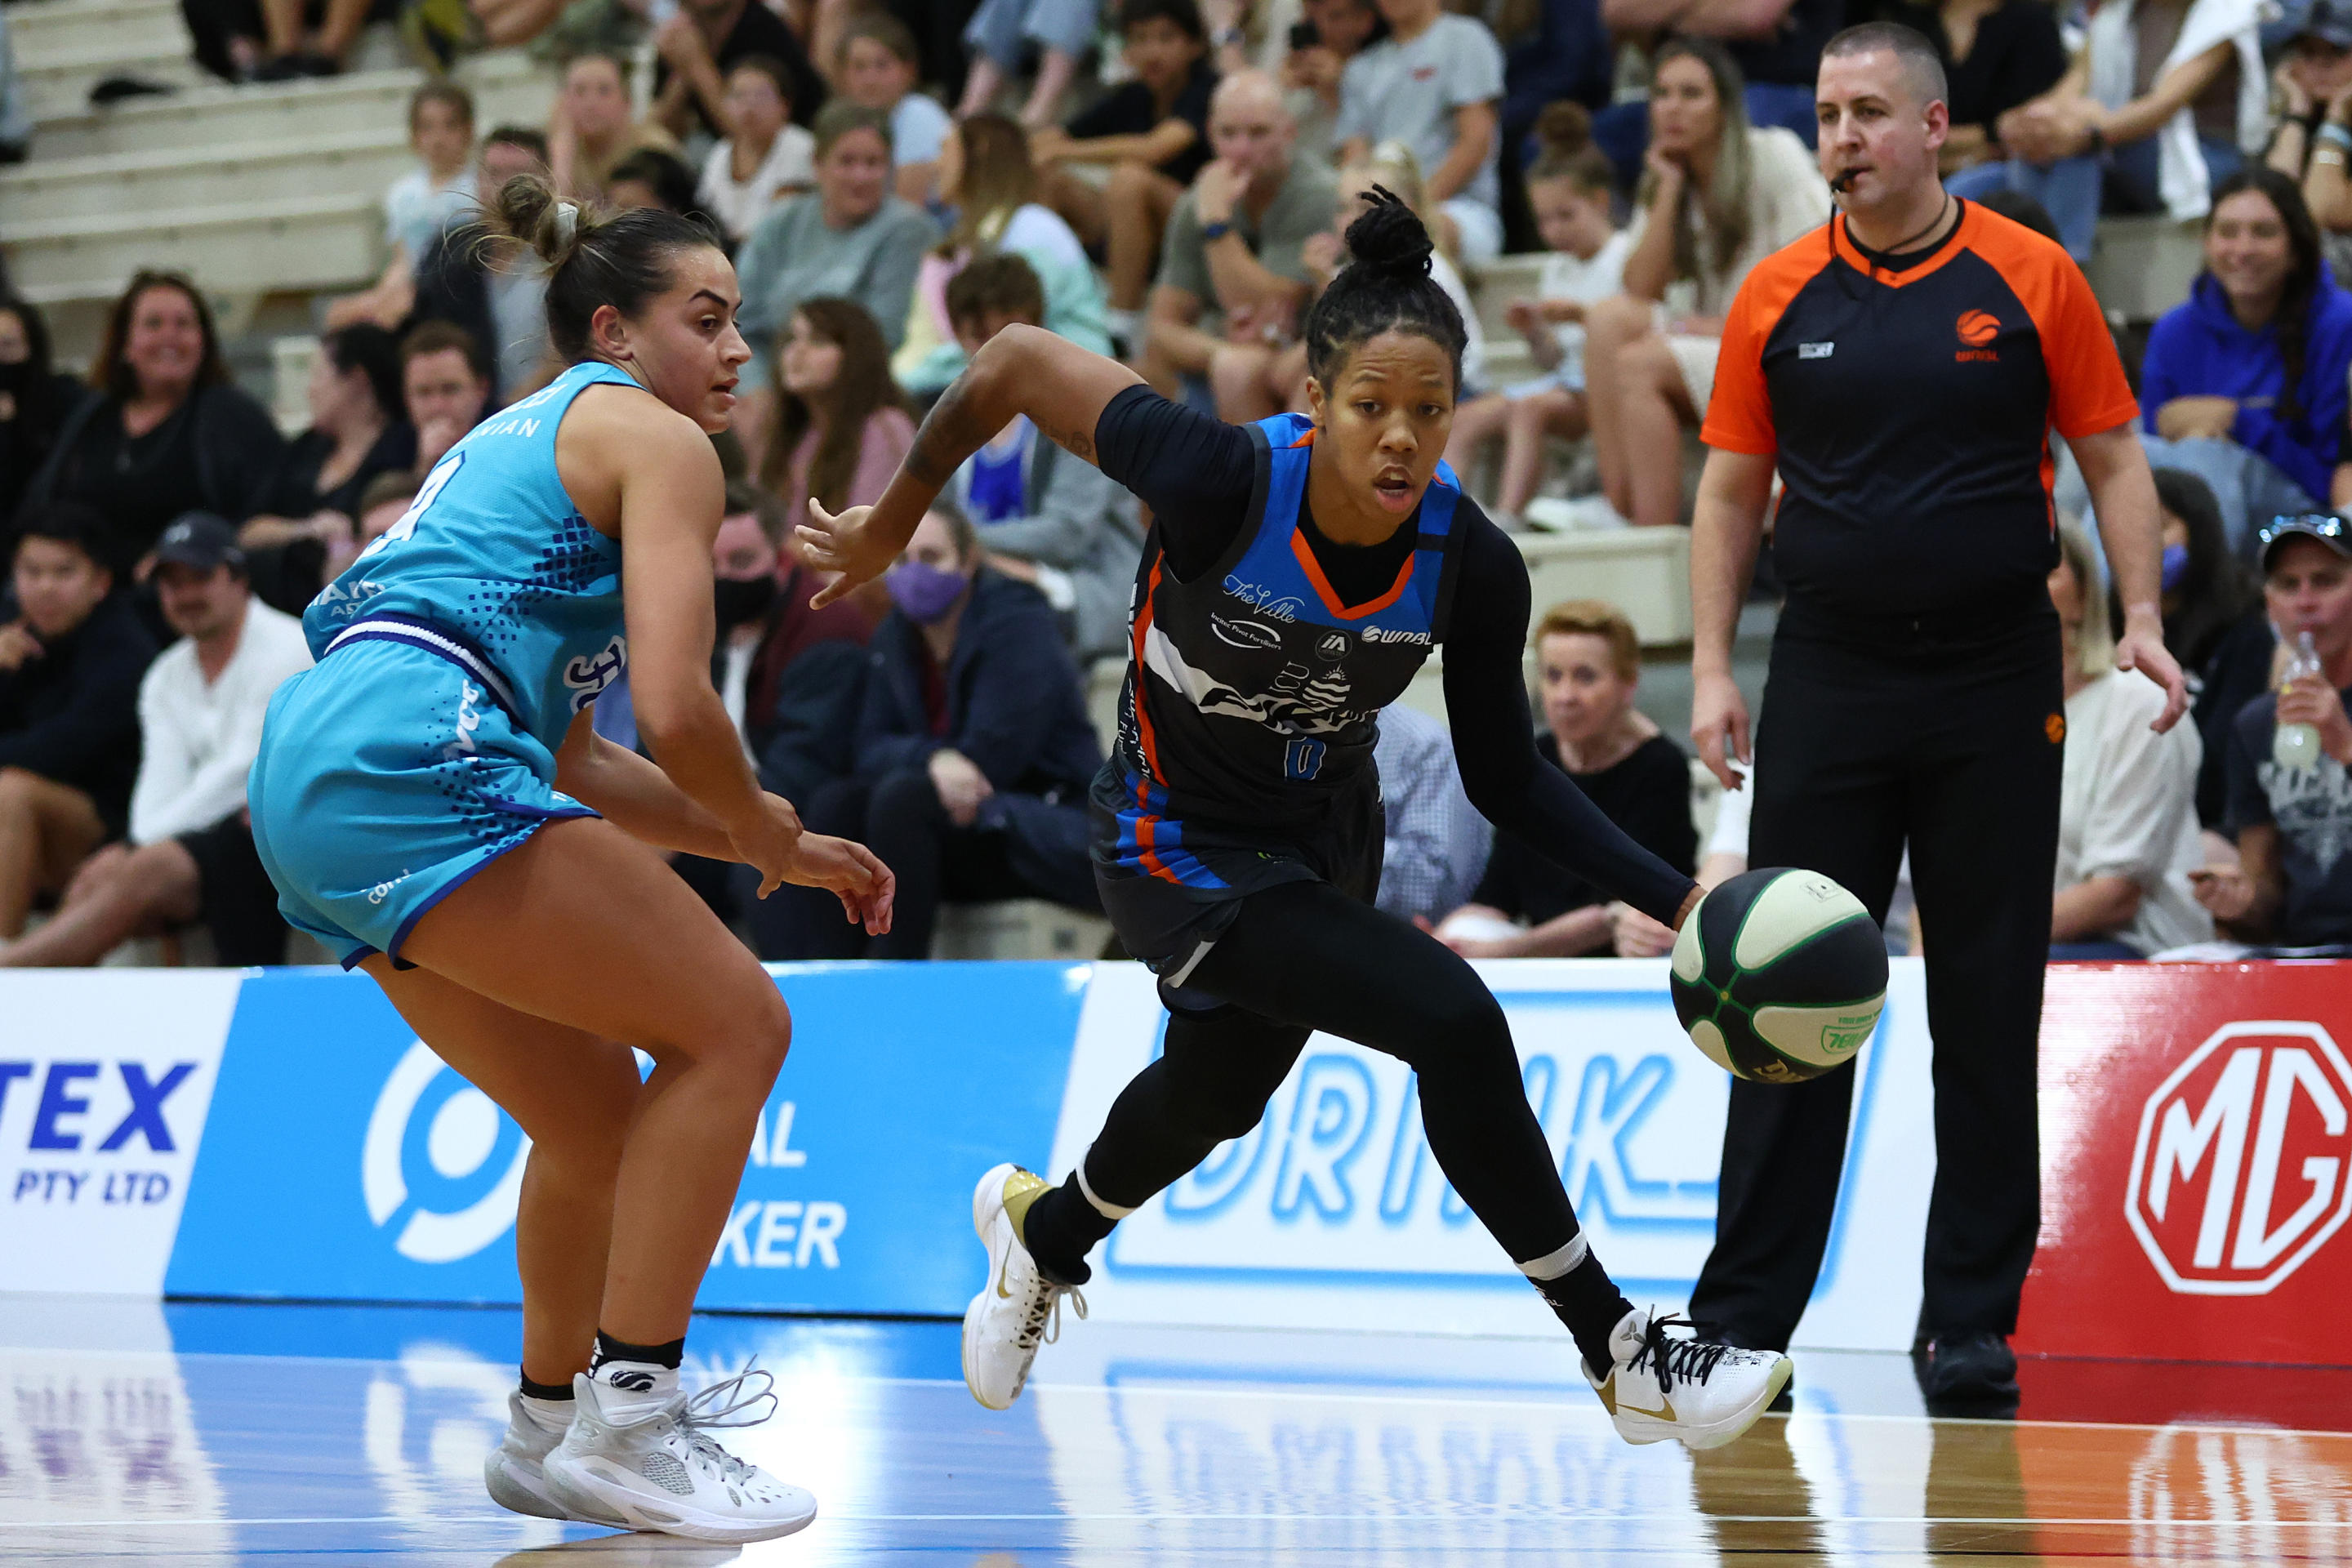 Sug Sutton competes for the Townsville Fire in Australia's WNBL in 2021. (Mike Owen/Getty Images)